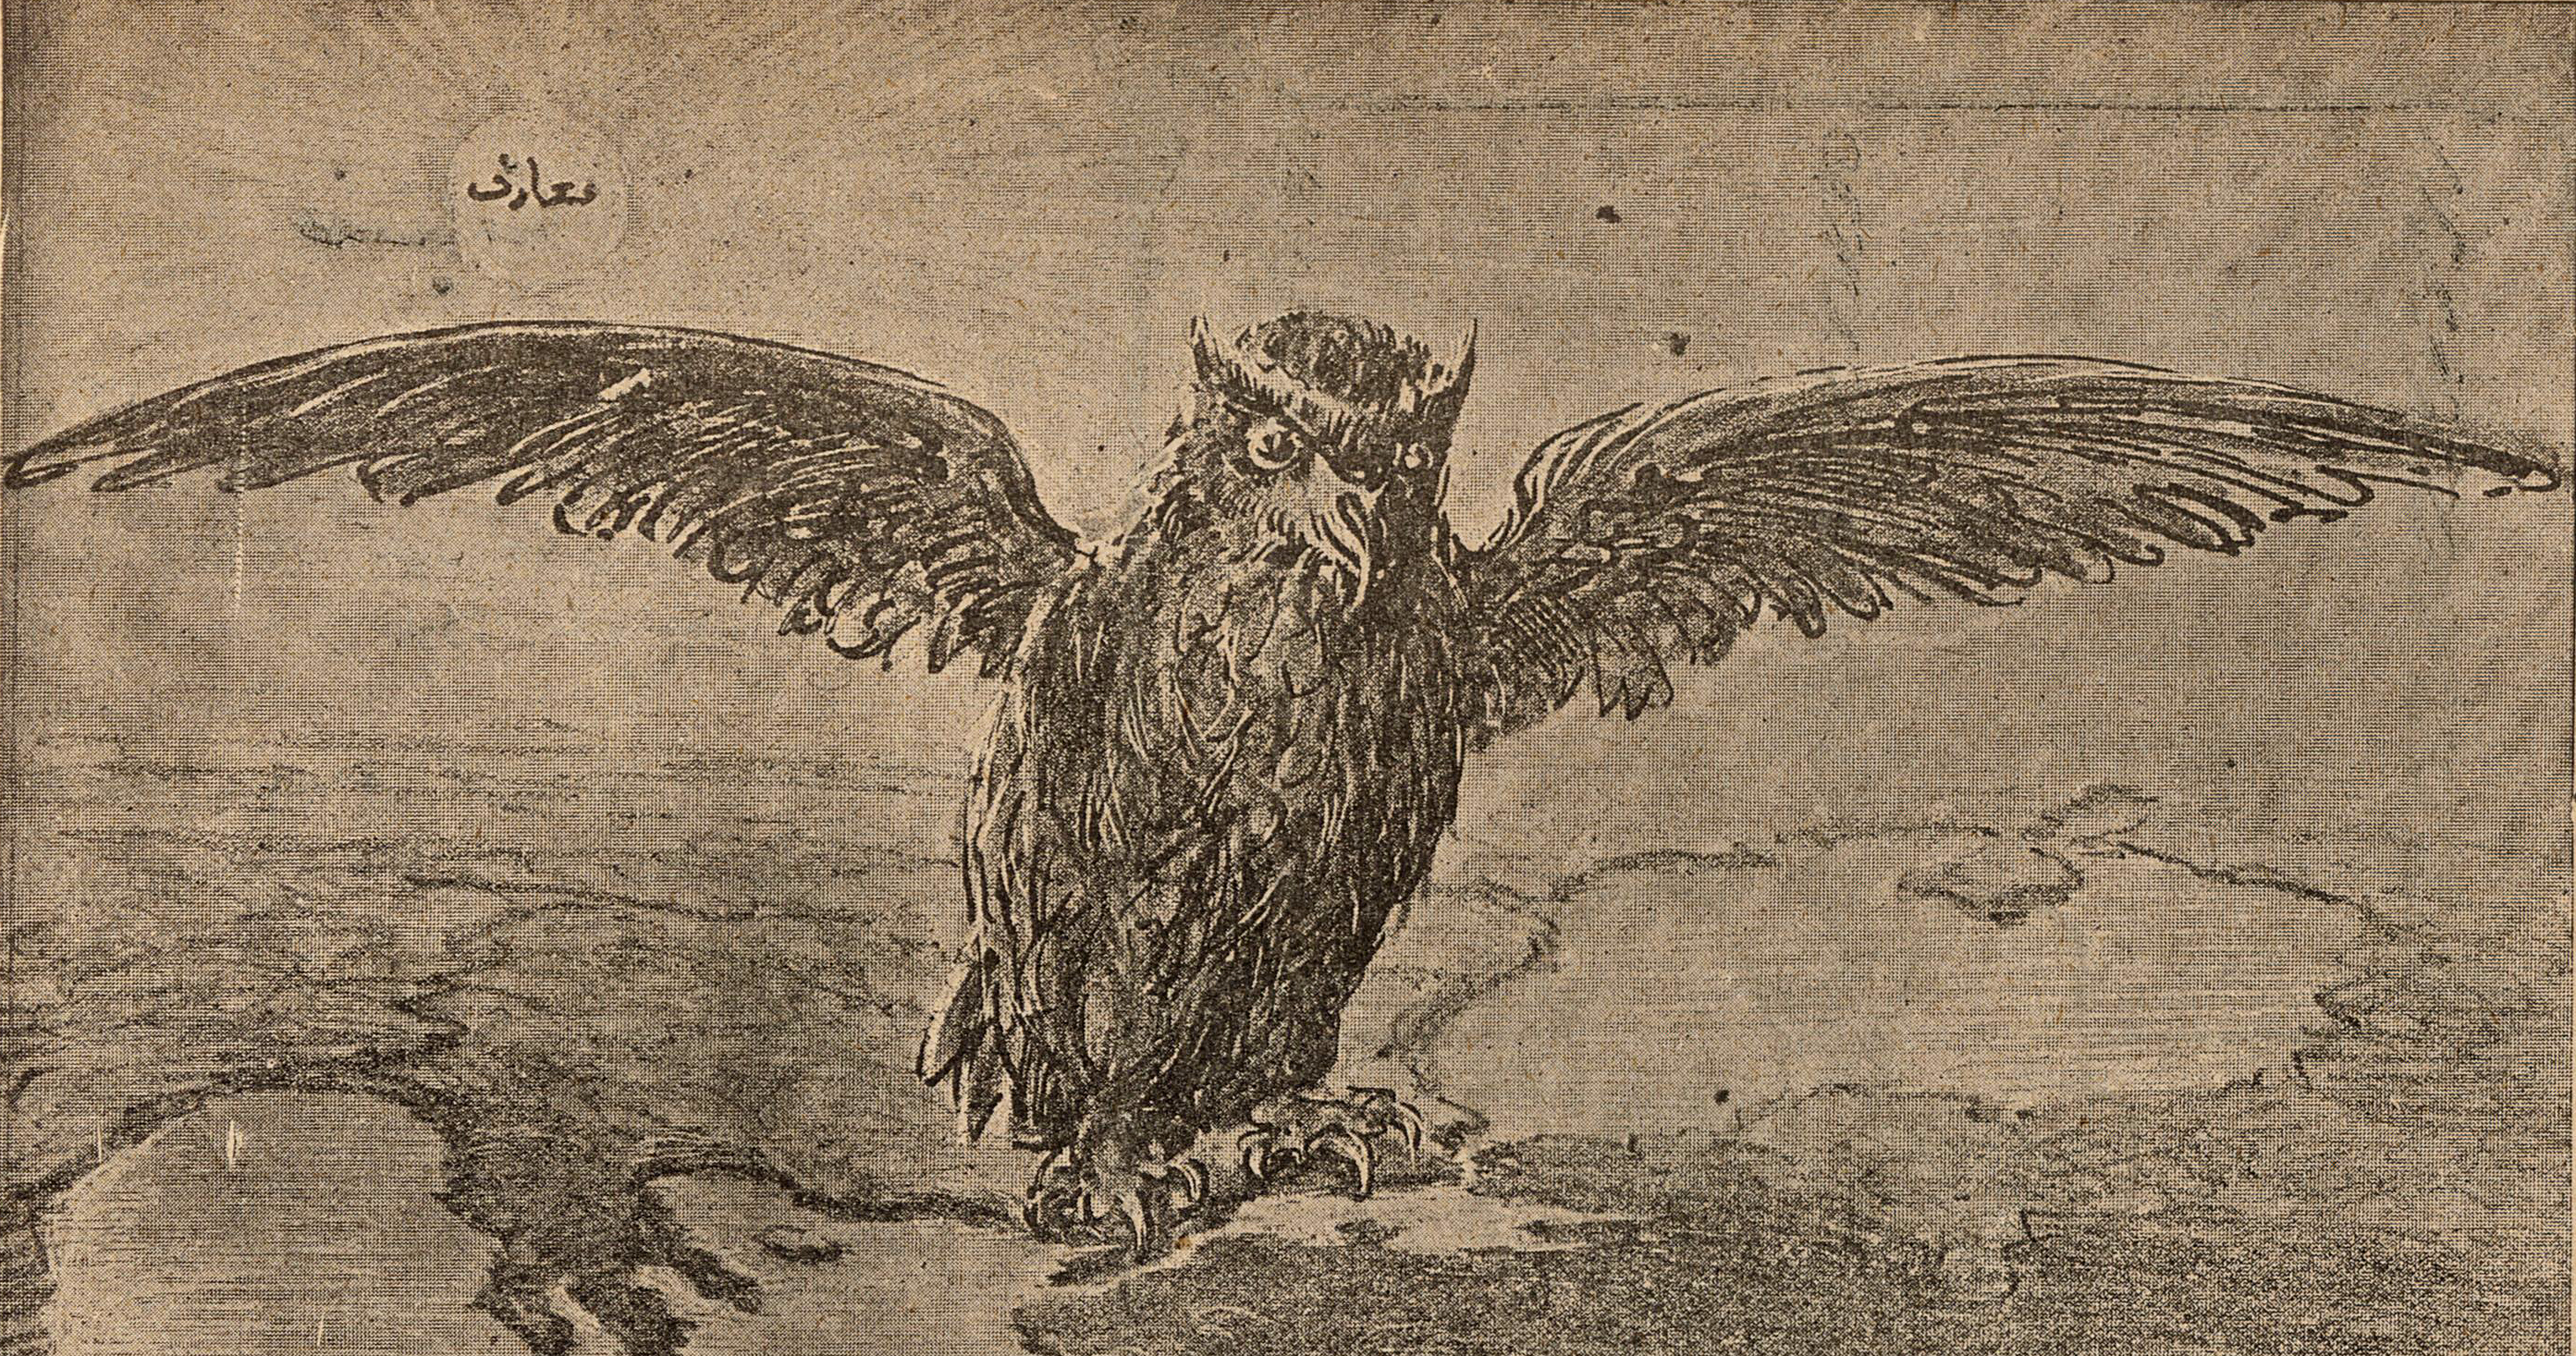 Esad Arseven, Celal and Cimcoz, Selah, “The Owl of Ignorance.” 1908.